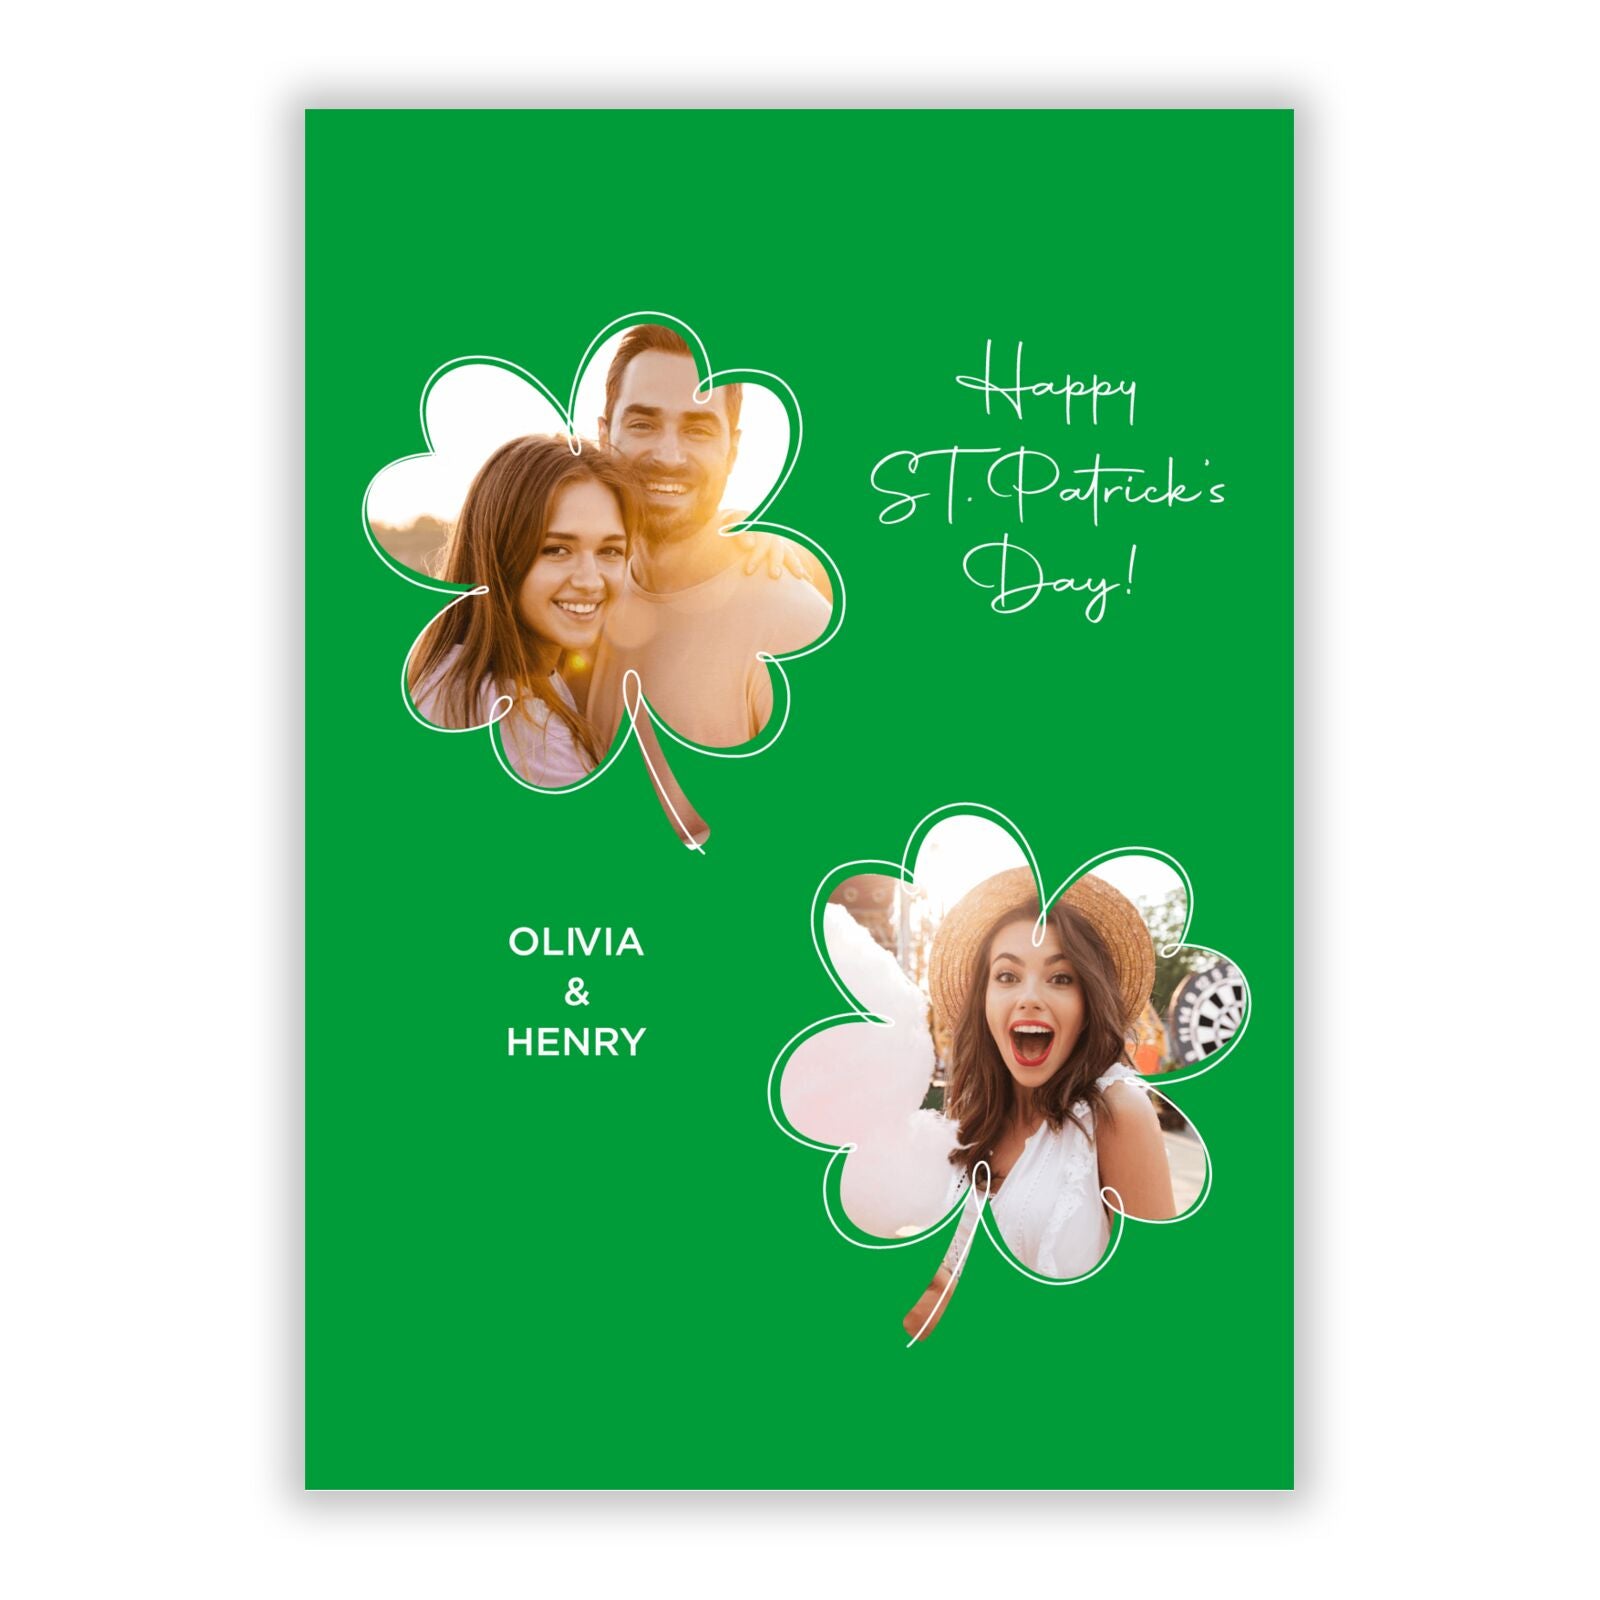 Personalised Photo St Patricks Day A5 Flat Greetings Card